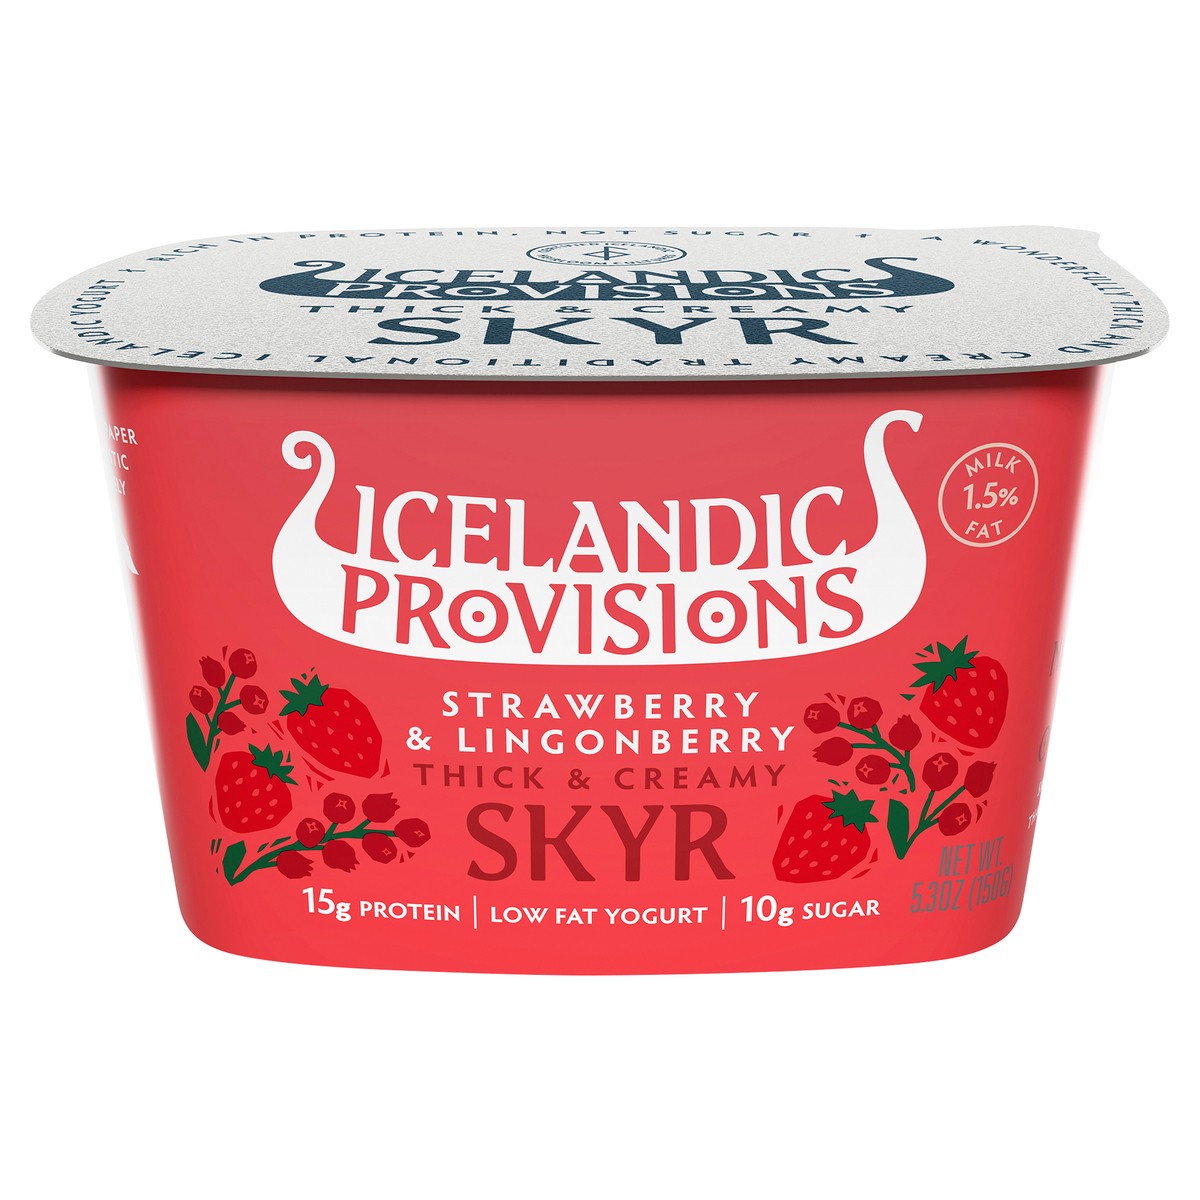 slide 1 of 3, Icelandic Provisions Strawberry & Lingonberry Thick & Creamy Low Fat Skyr, 5.3 oz